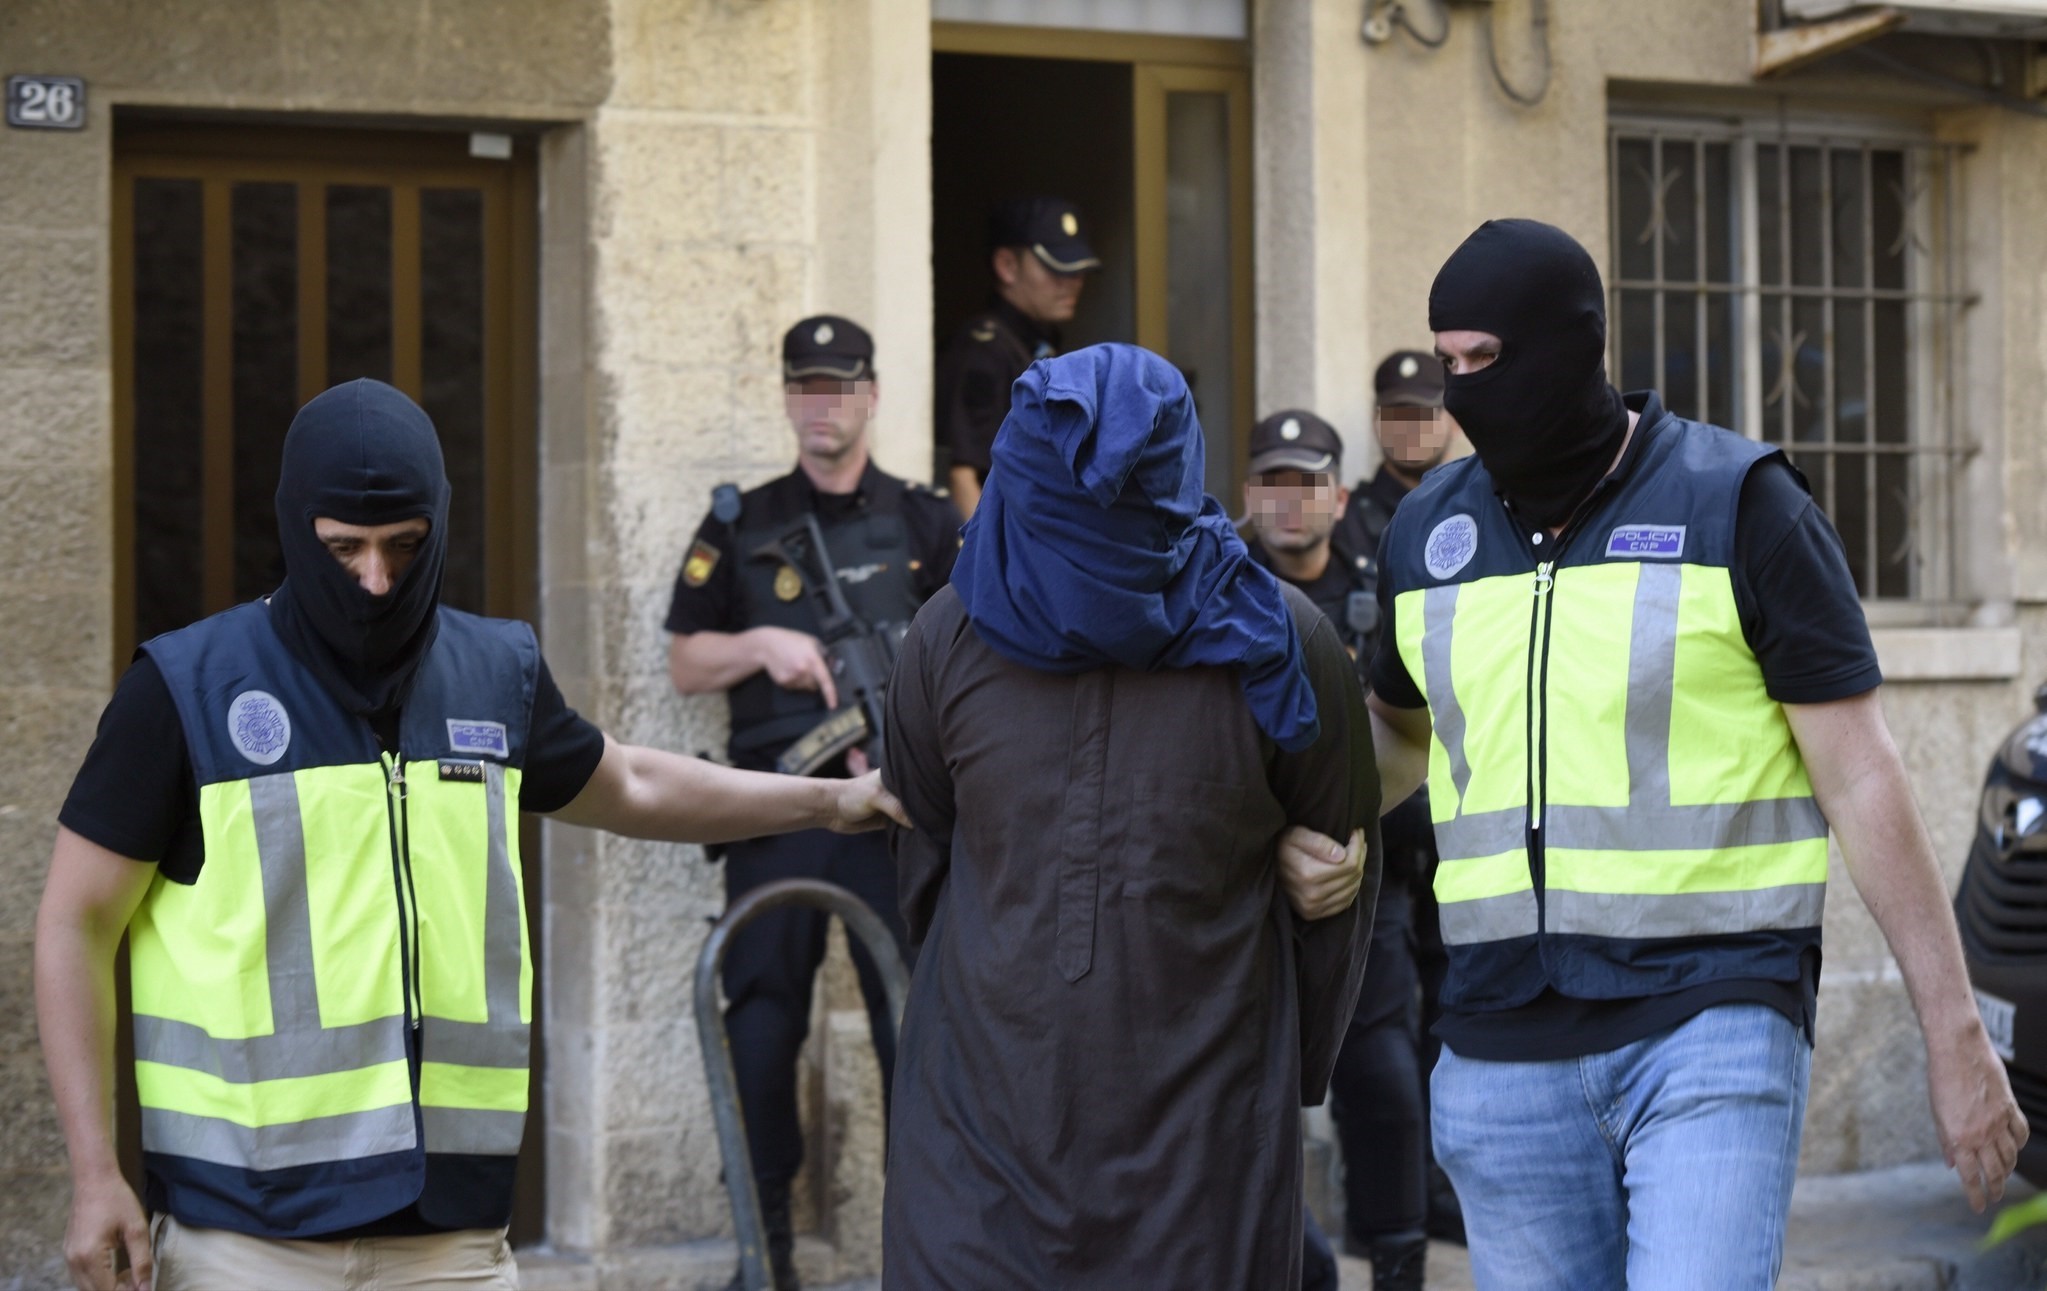 Policemen escort a suspect that was arrested as part of an international anti-terror police operation, in Palma Majorca (EPA Photo)